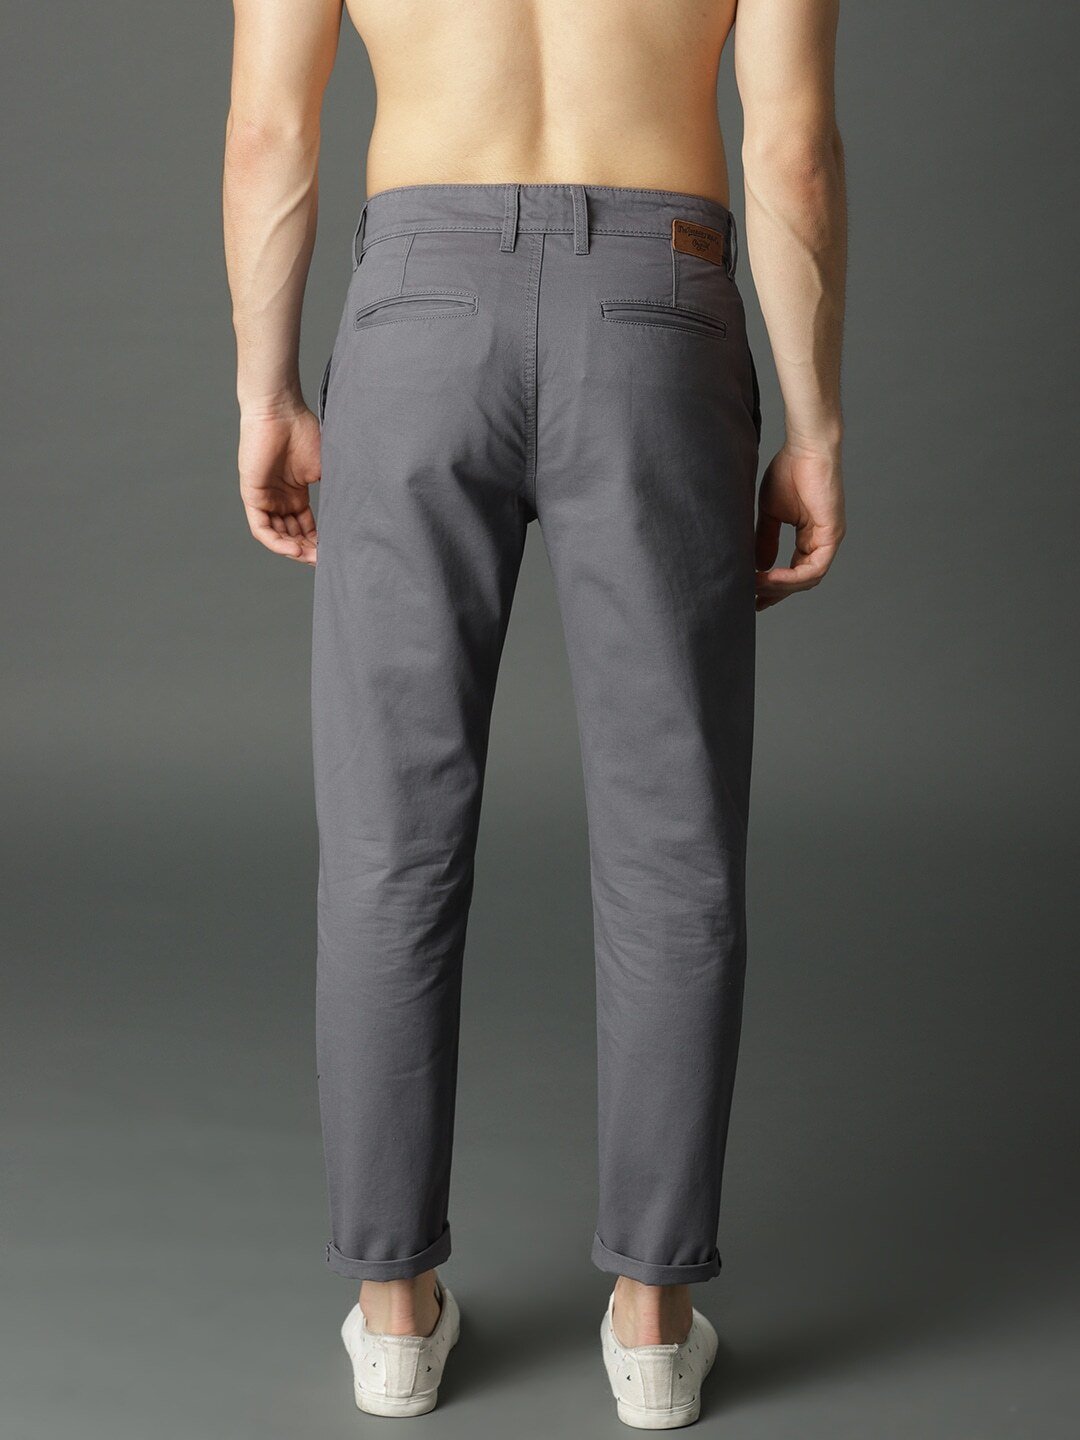 Men Charcoal Grey Regular Fit Solid Chinos-7250465